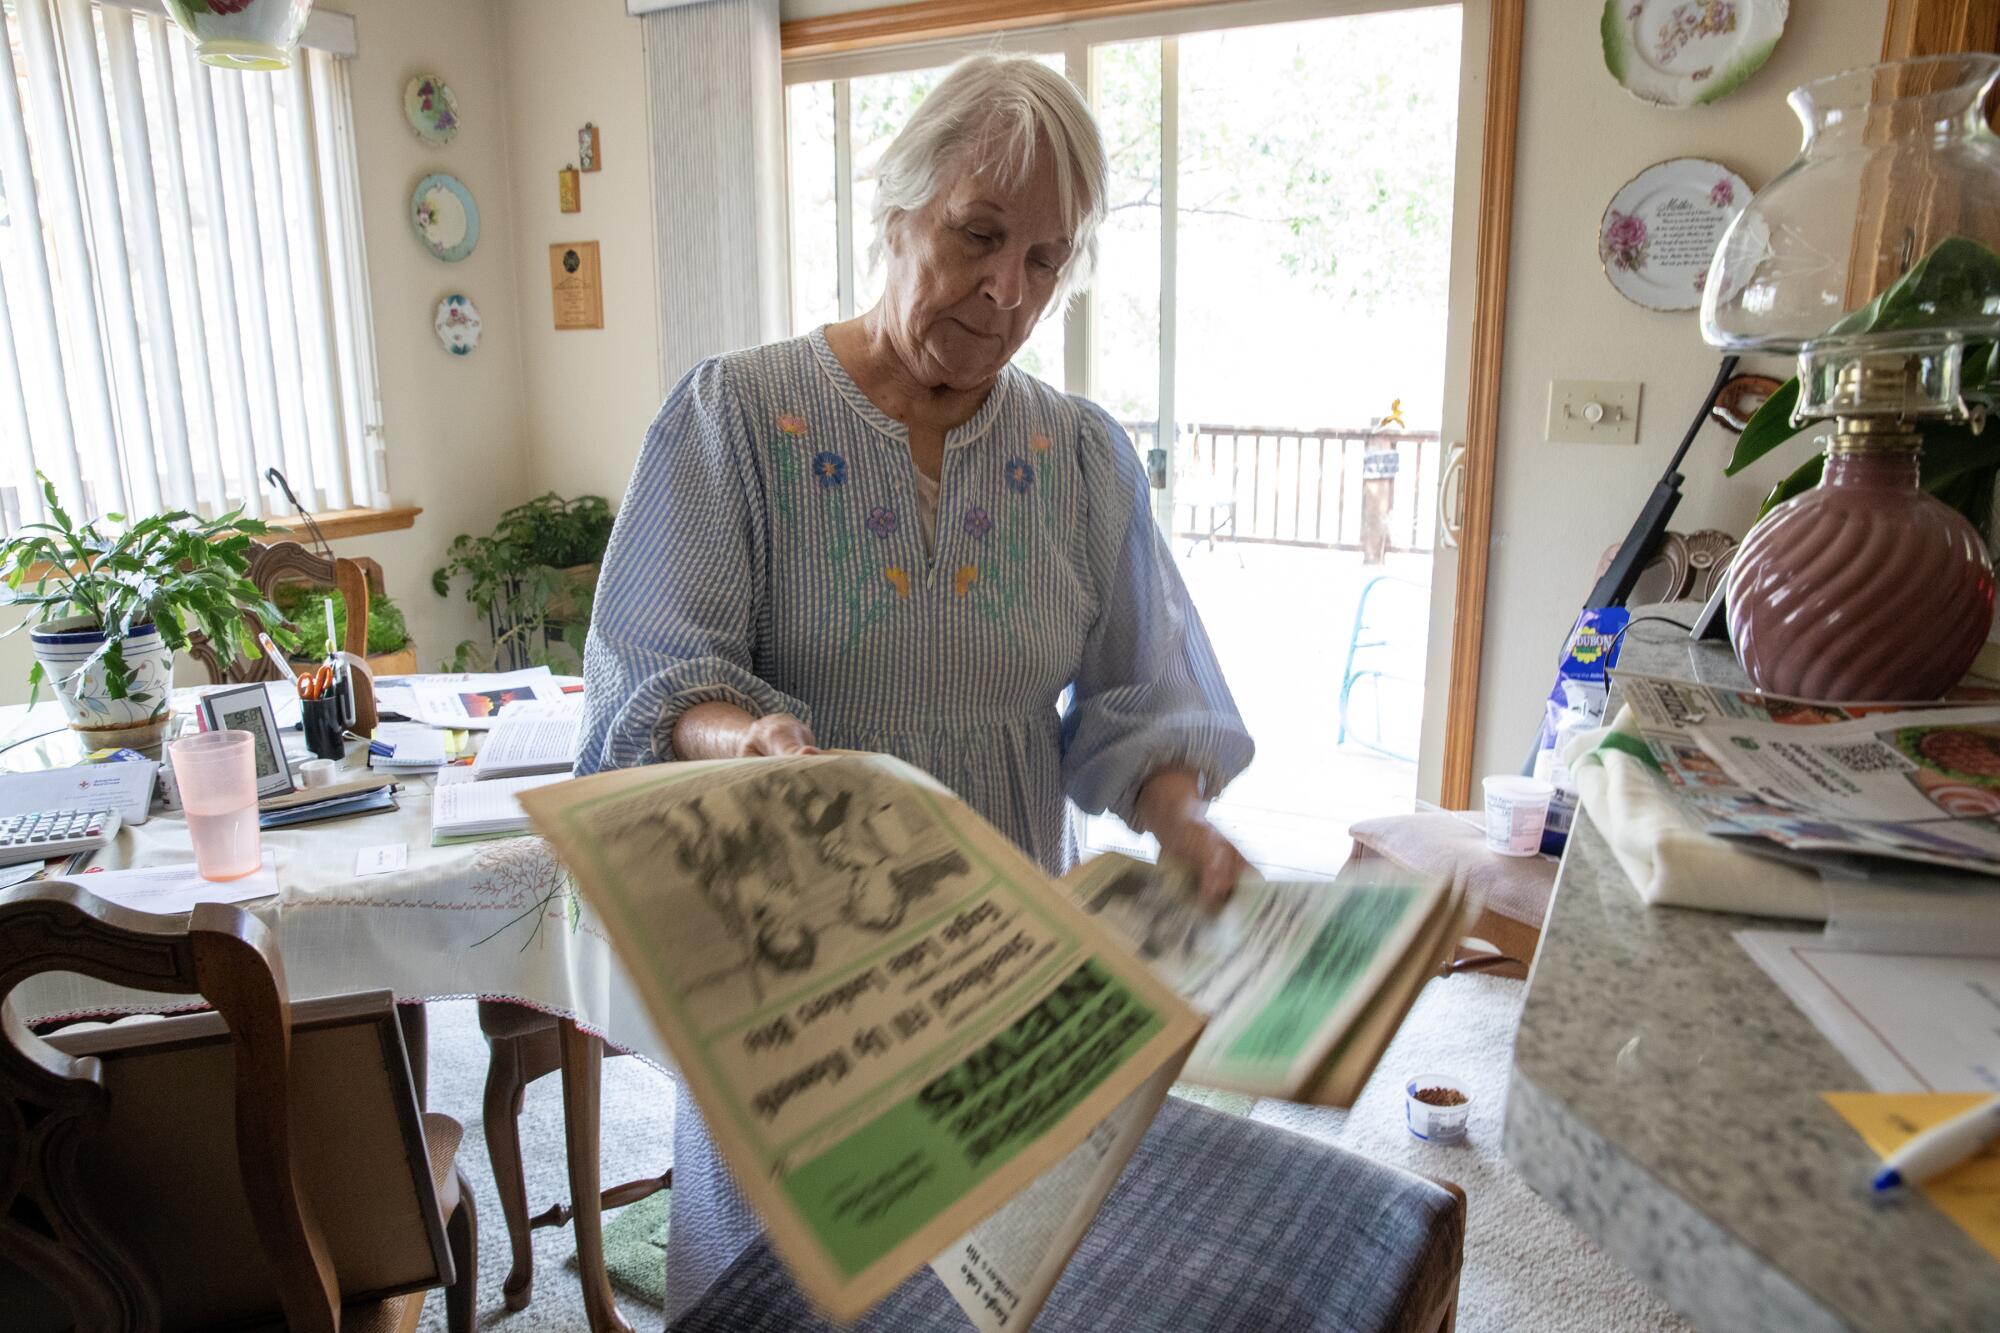 A woman looks at newspaper in a dining area.